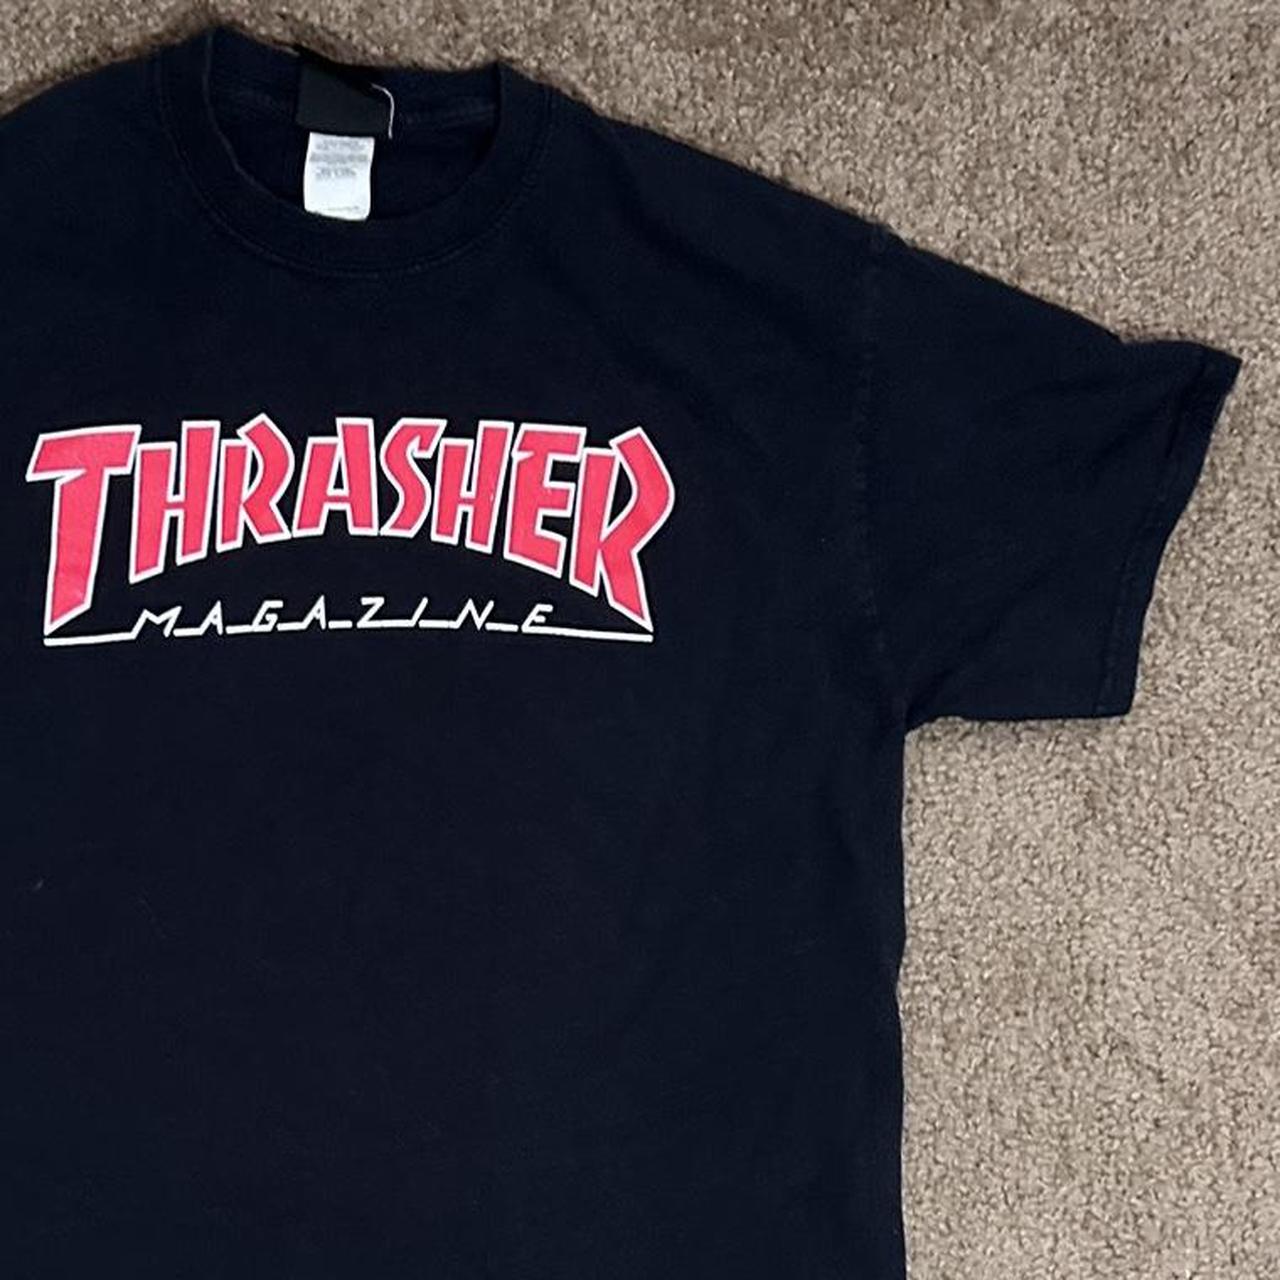 Thrasher Men's Black and Red T-shirt (3)